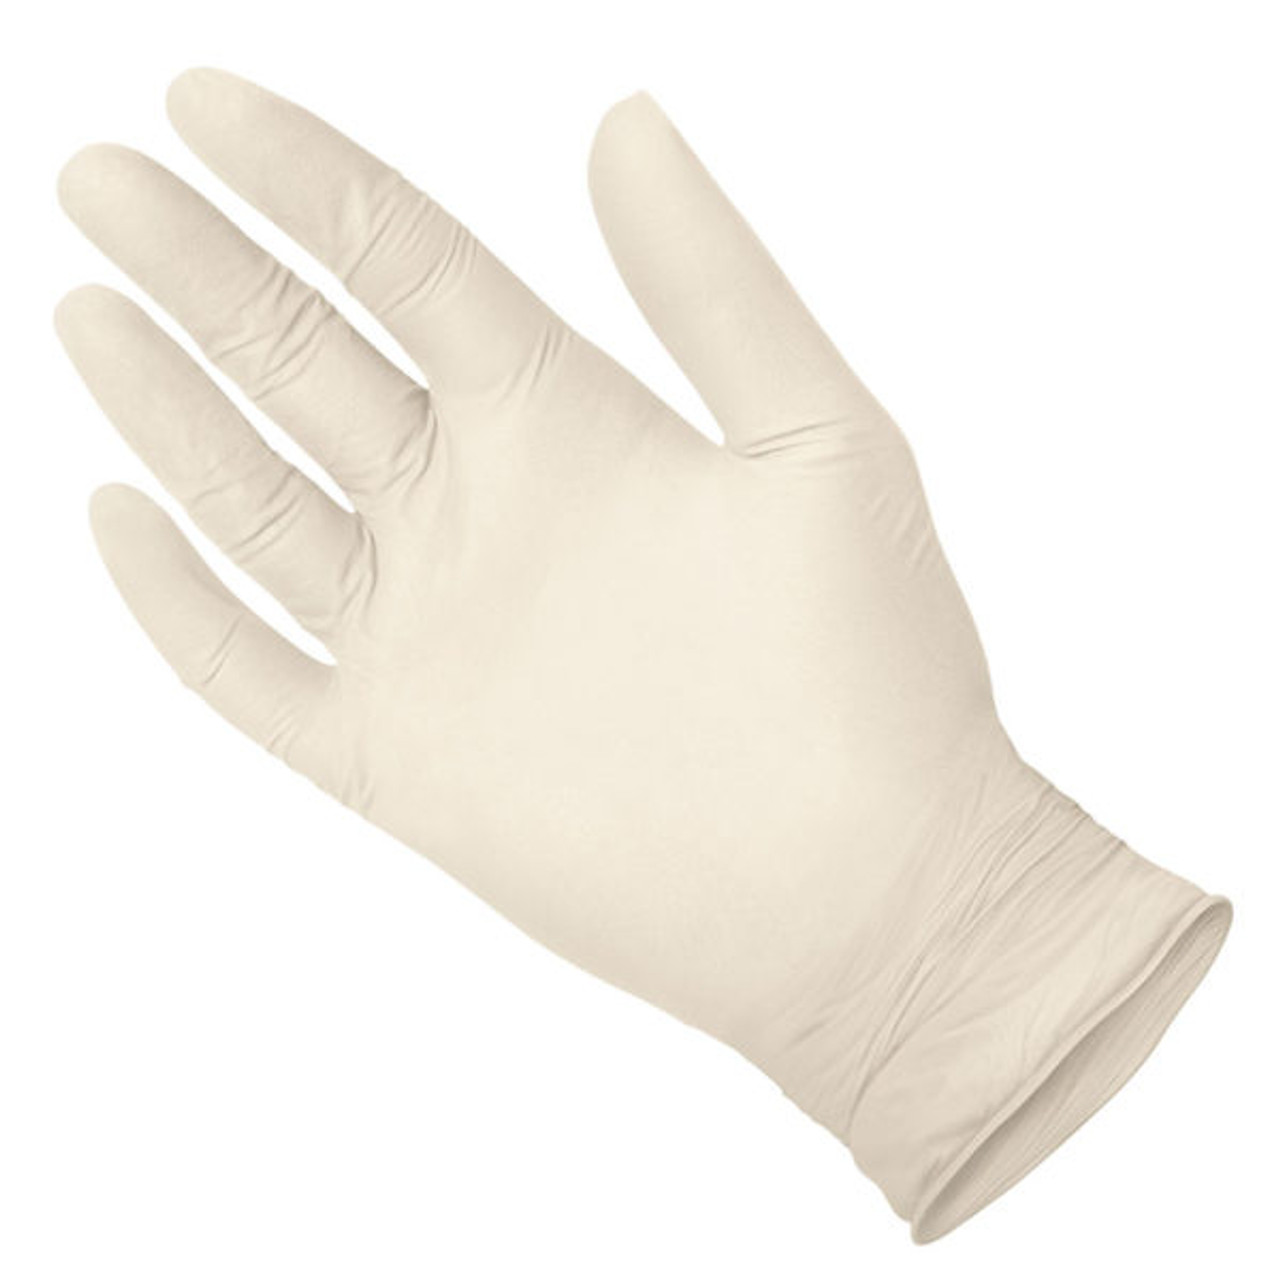 Medgluv Latex Exam Glove, Textured, Low Protein, 6.5mil, X-Large 100/bx, 10/cs